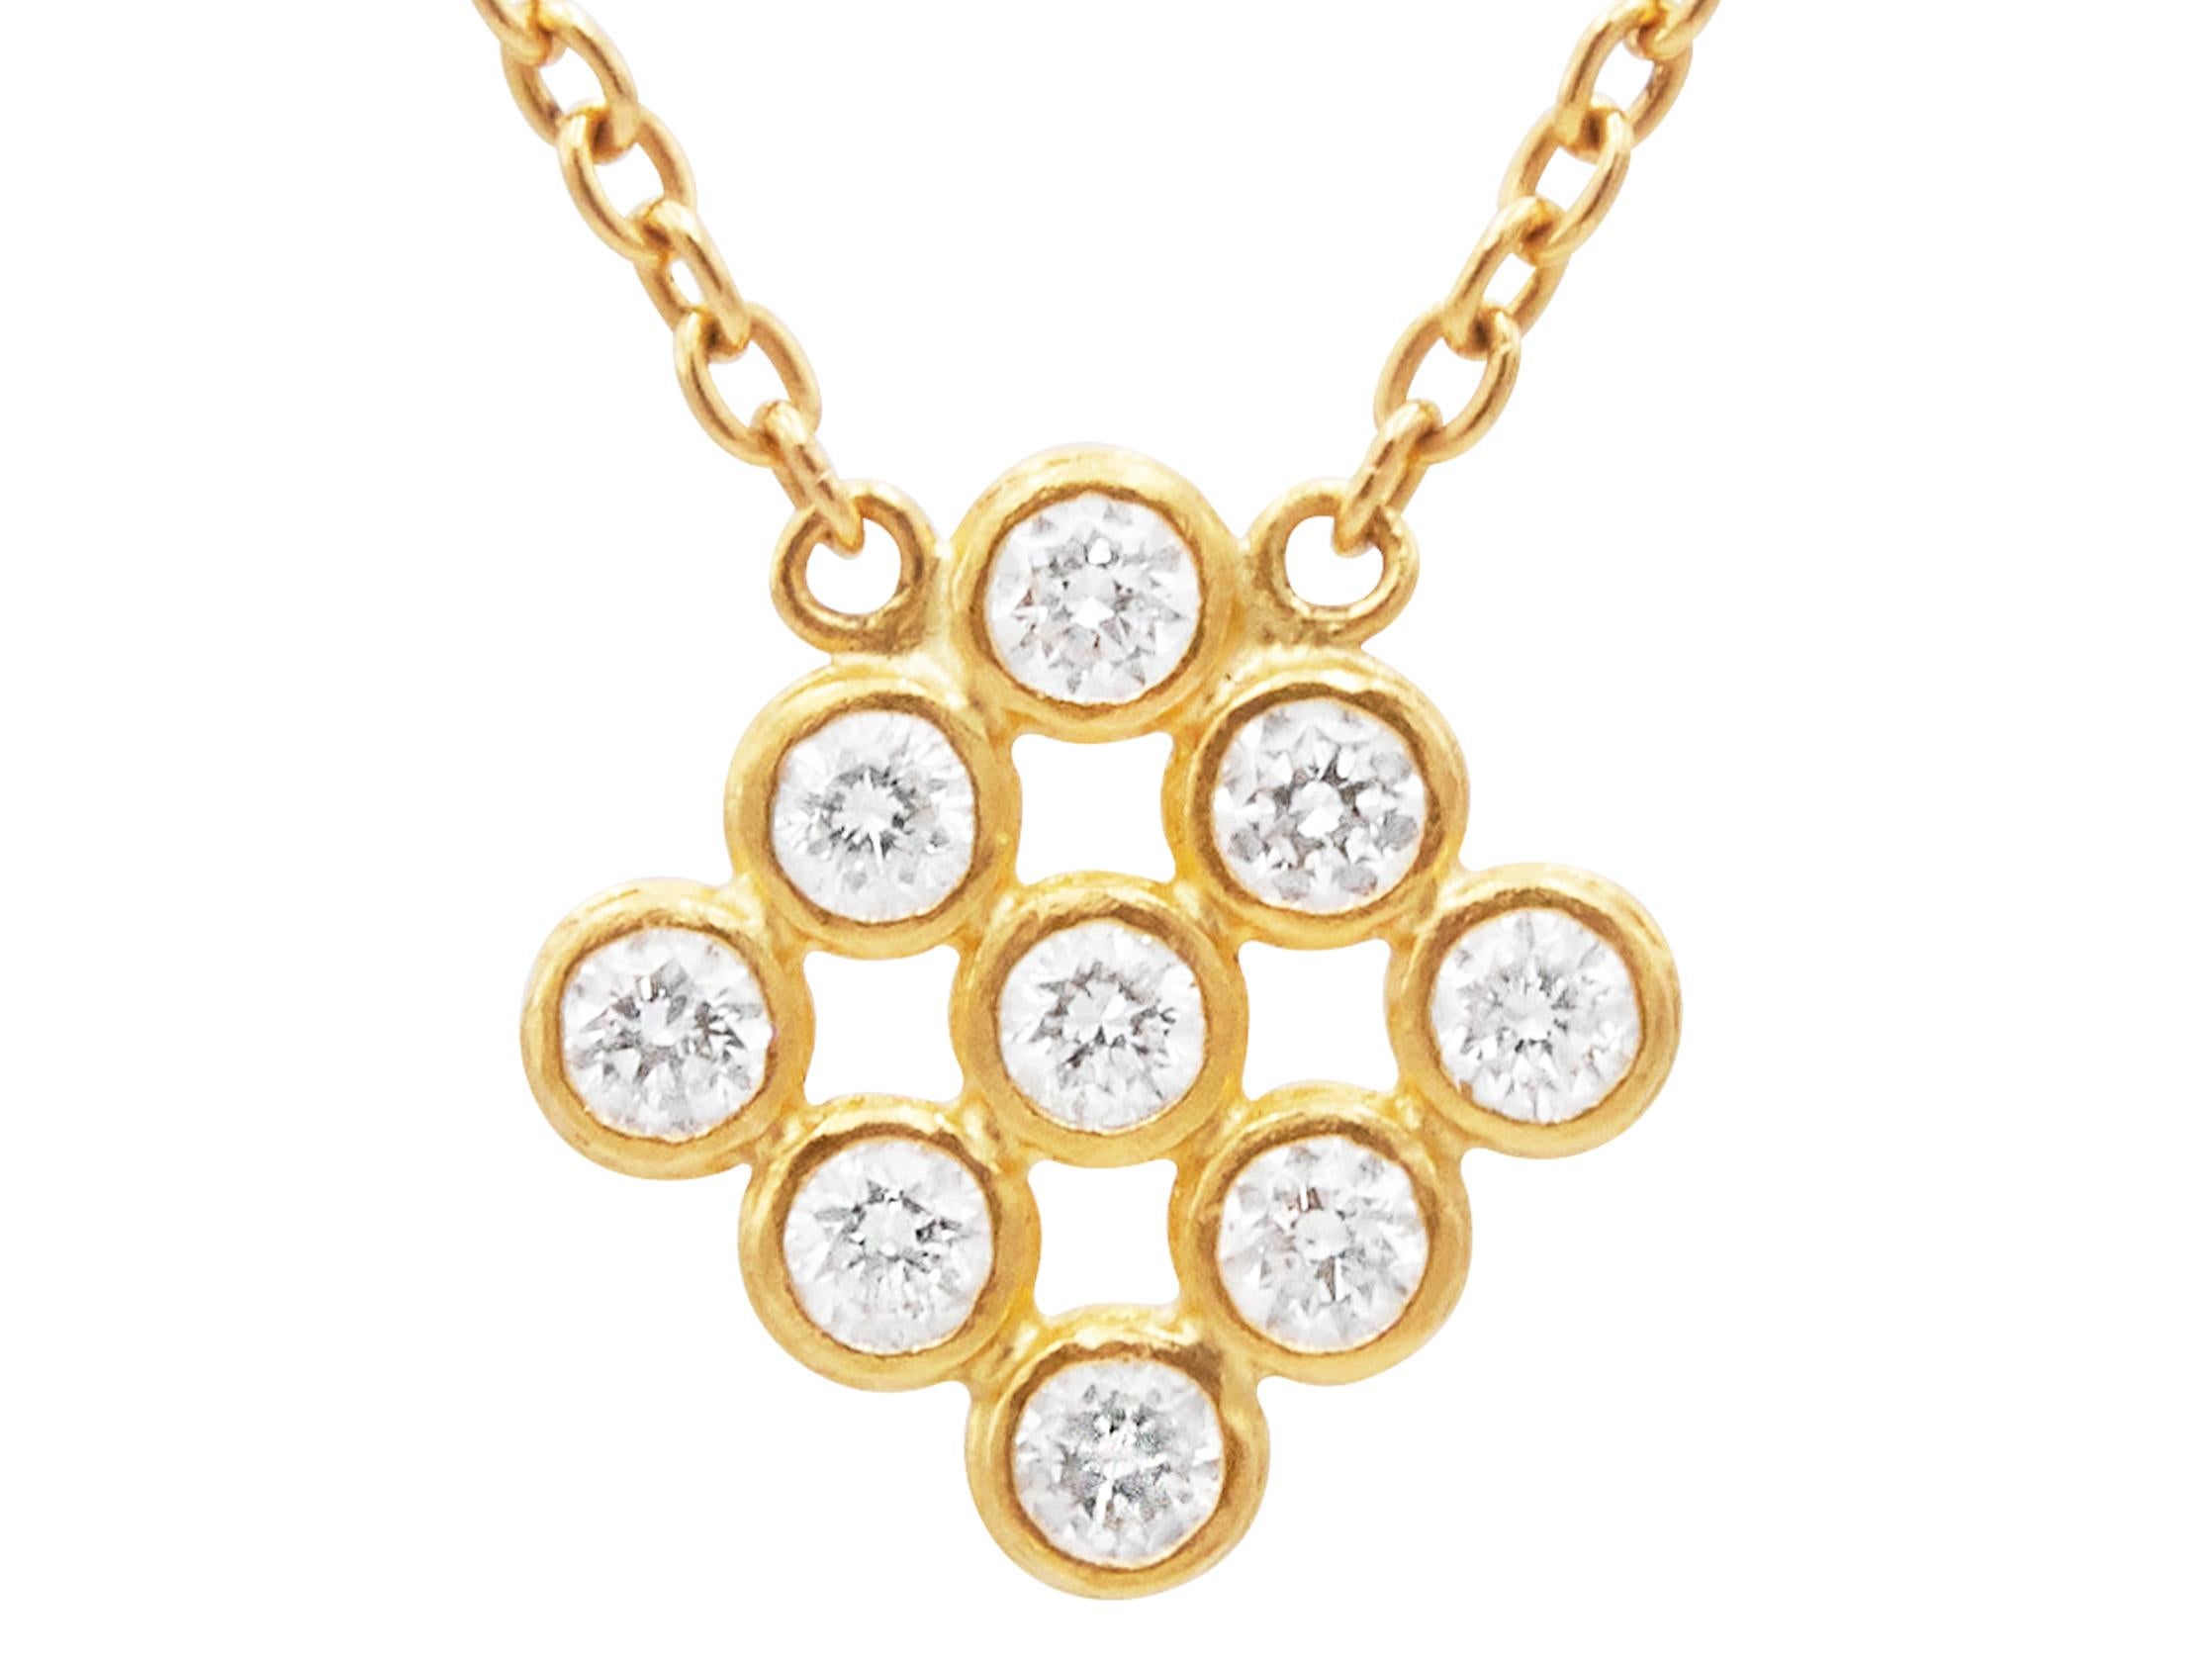 GURHAN delicate diamond pendant necklace in 24 Karat hammered yellow gold featuring a cluster of brilliant cut white diamonds, (9) 0.873 cts. 16-18